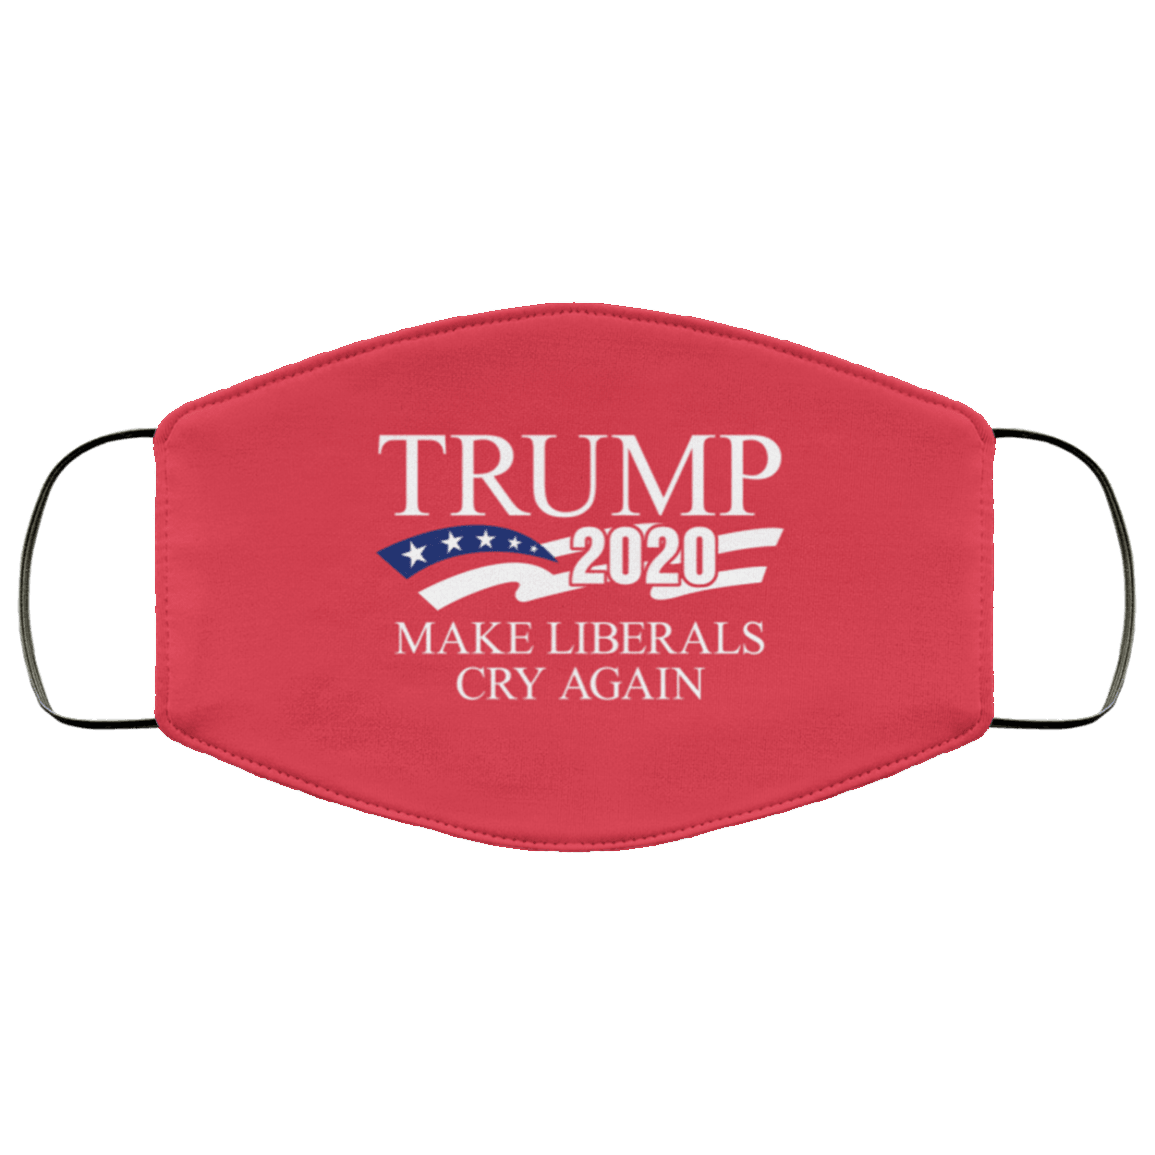 Designs by MyUtopia Shout Out:Trump 2020 Make Liberals Cry Again Adult Fabric Face Mask with Elastic Ear Loops,3 Layer Fabric Face Mask / Red / Adult,Fabric Face Mask